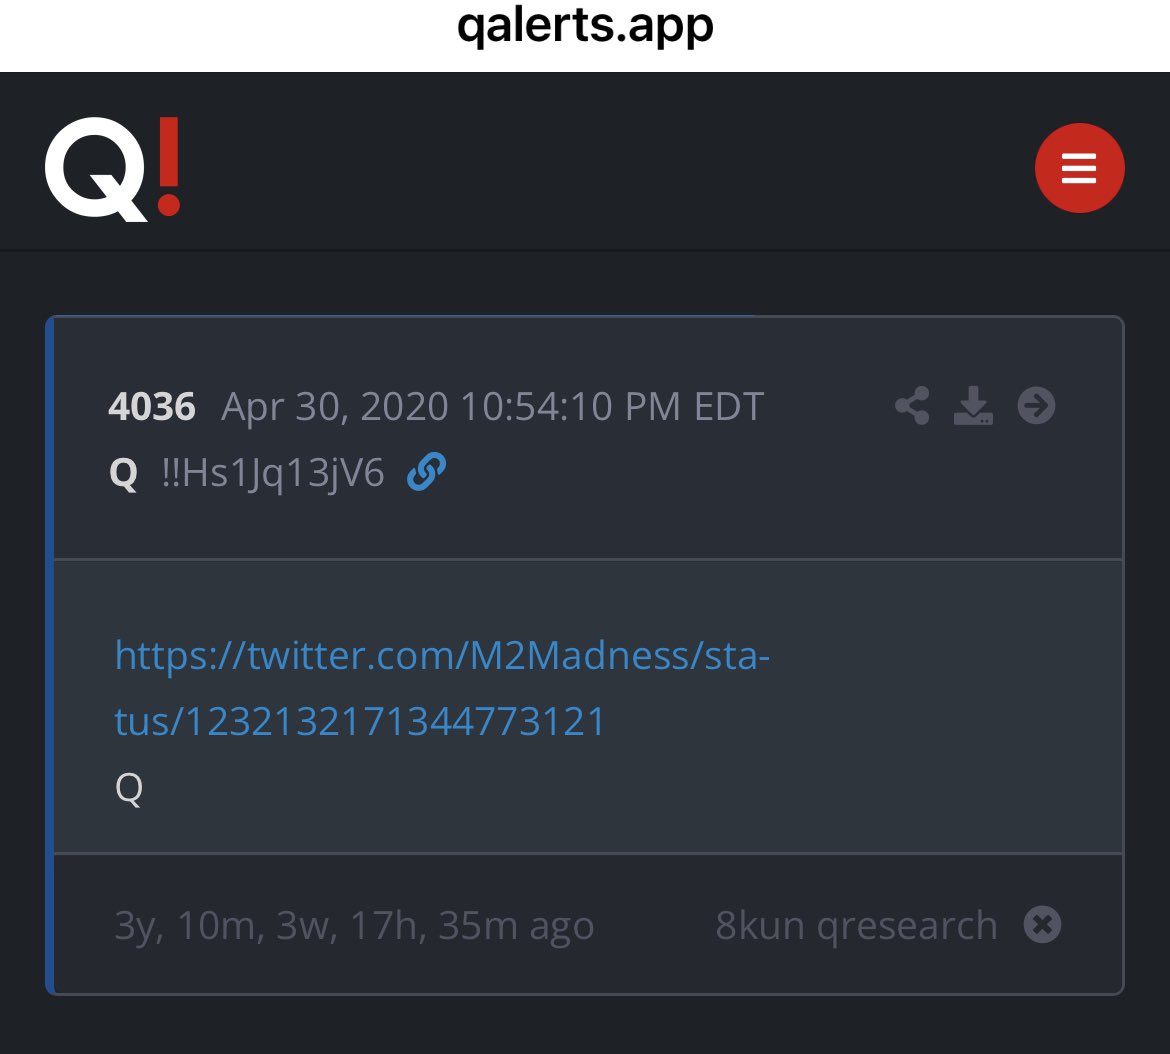 #Memba when #QDropped some of us rushed to the post if on Twitter and say Q sent me and try to be first to do it? Well sometimes you just have to survive to make it to first! #HoHoHo #SantaThug #Q @realDonaldTrump @Mike_Pence #TrumpPence2020 👉🏻 twitter.com/M2Madness/stat…